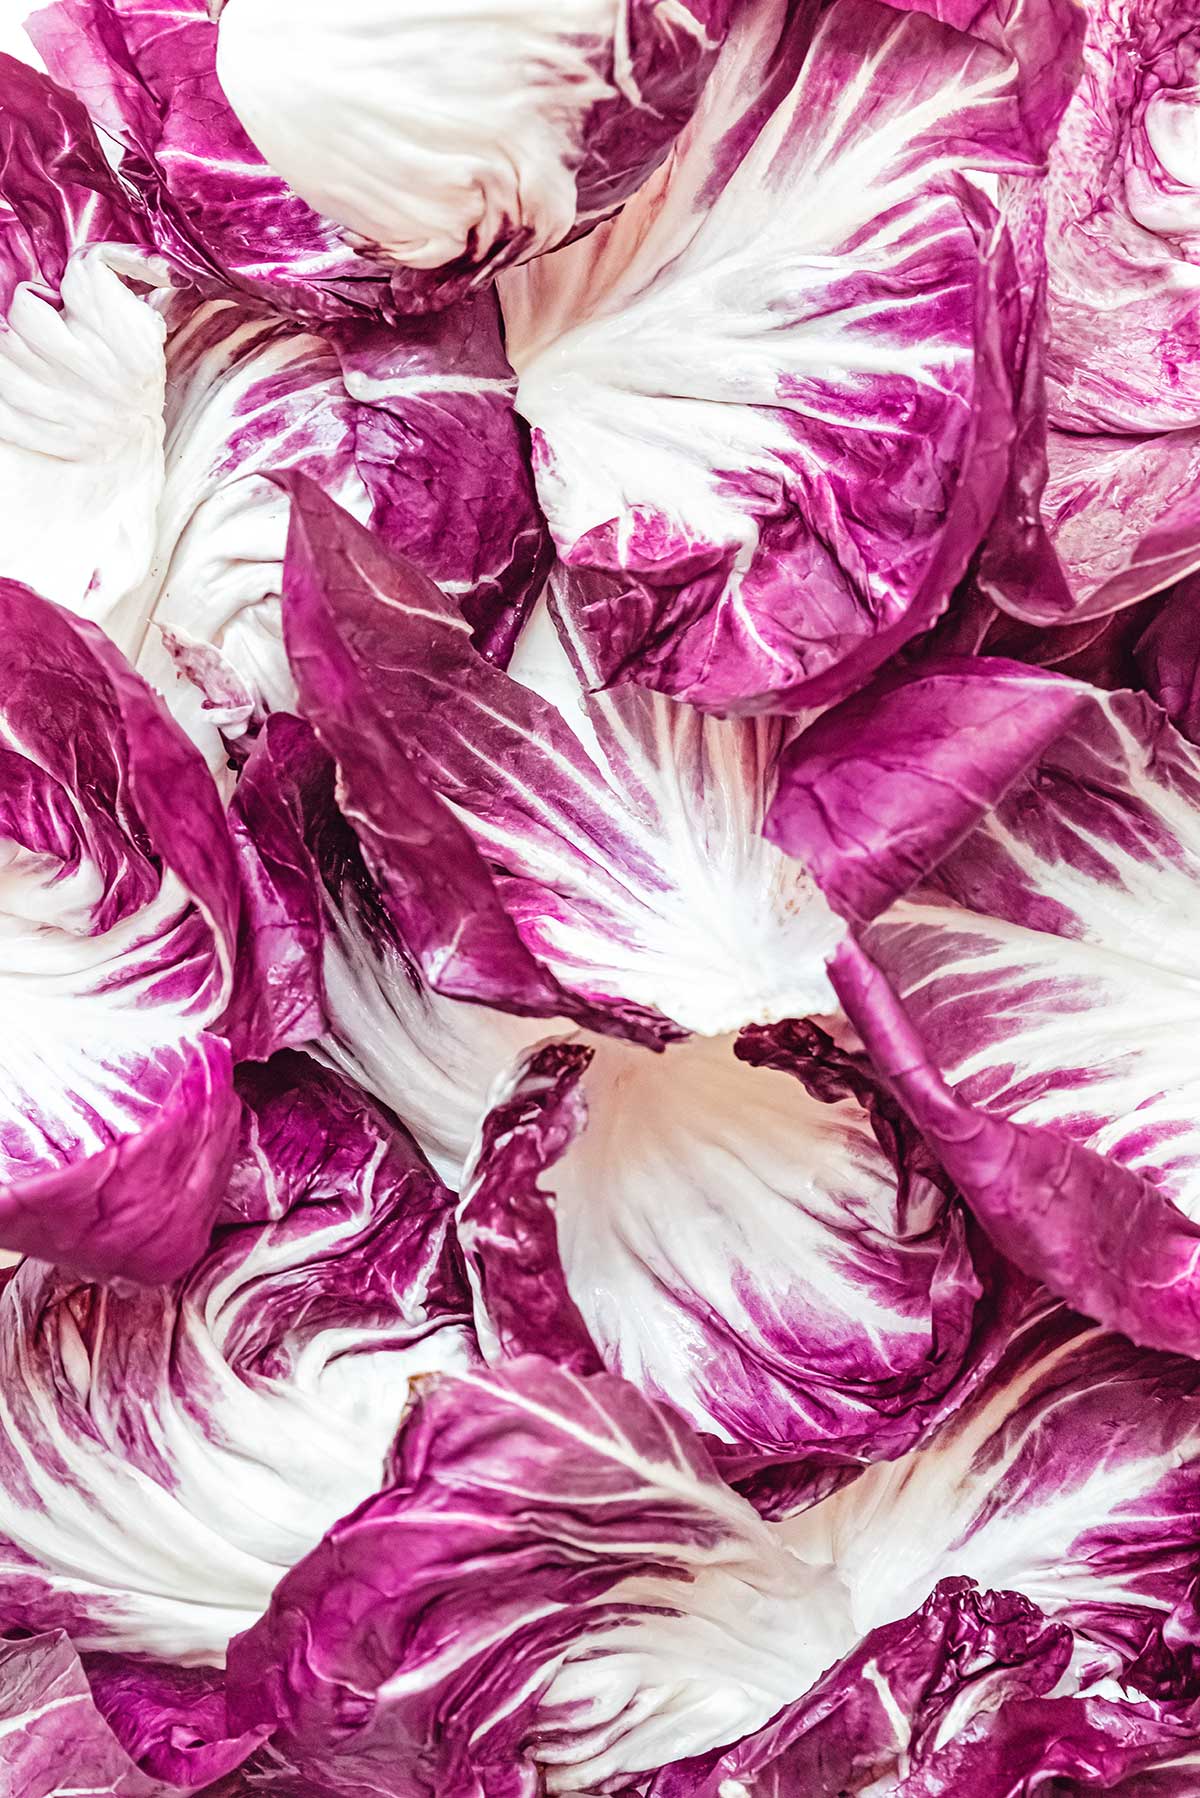 An up-close view detailing the texture and color of radicchio lettuce leaves